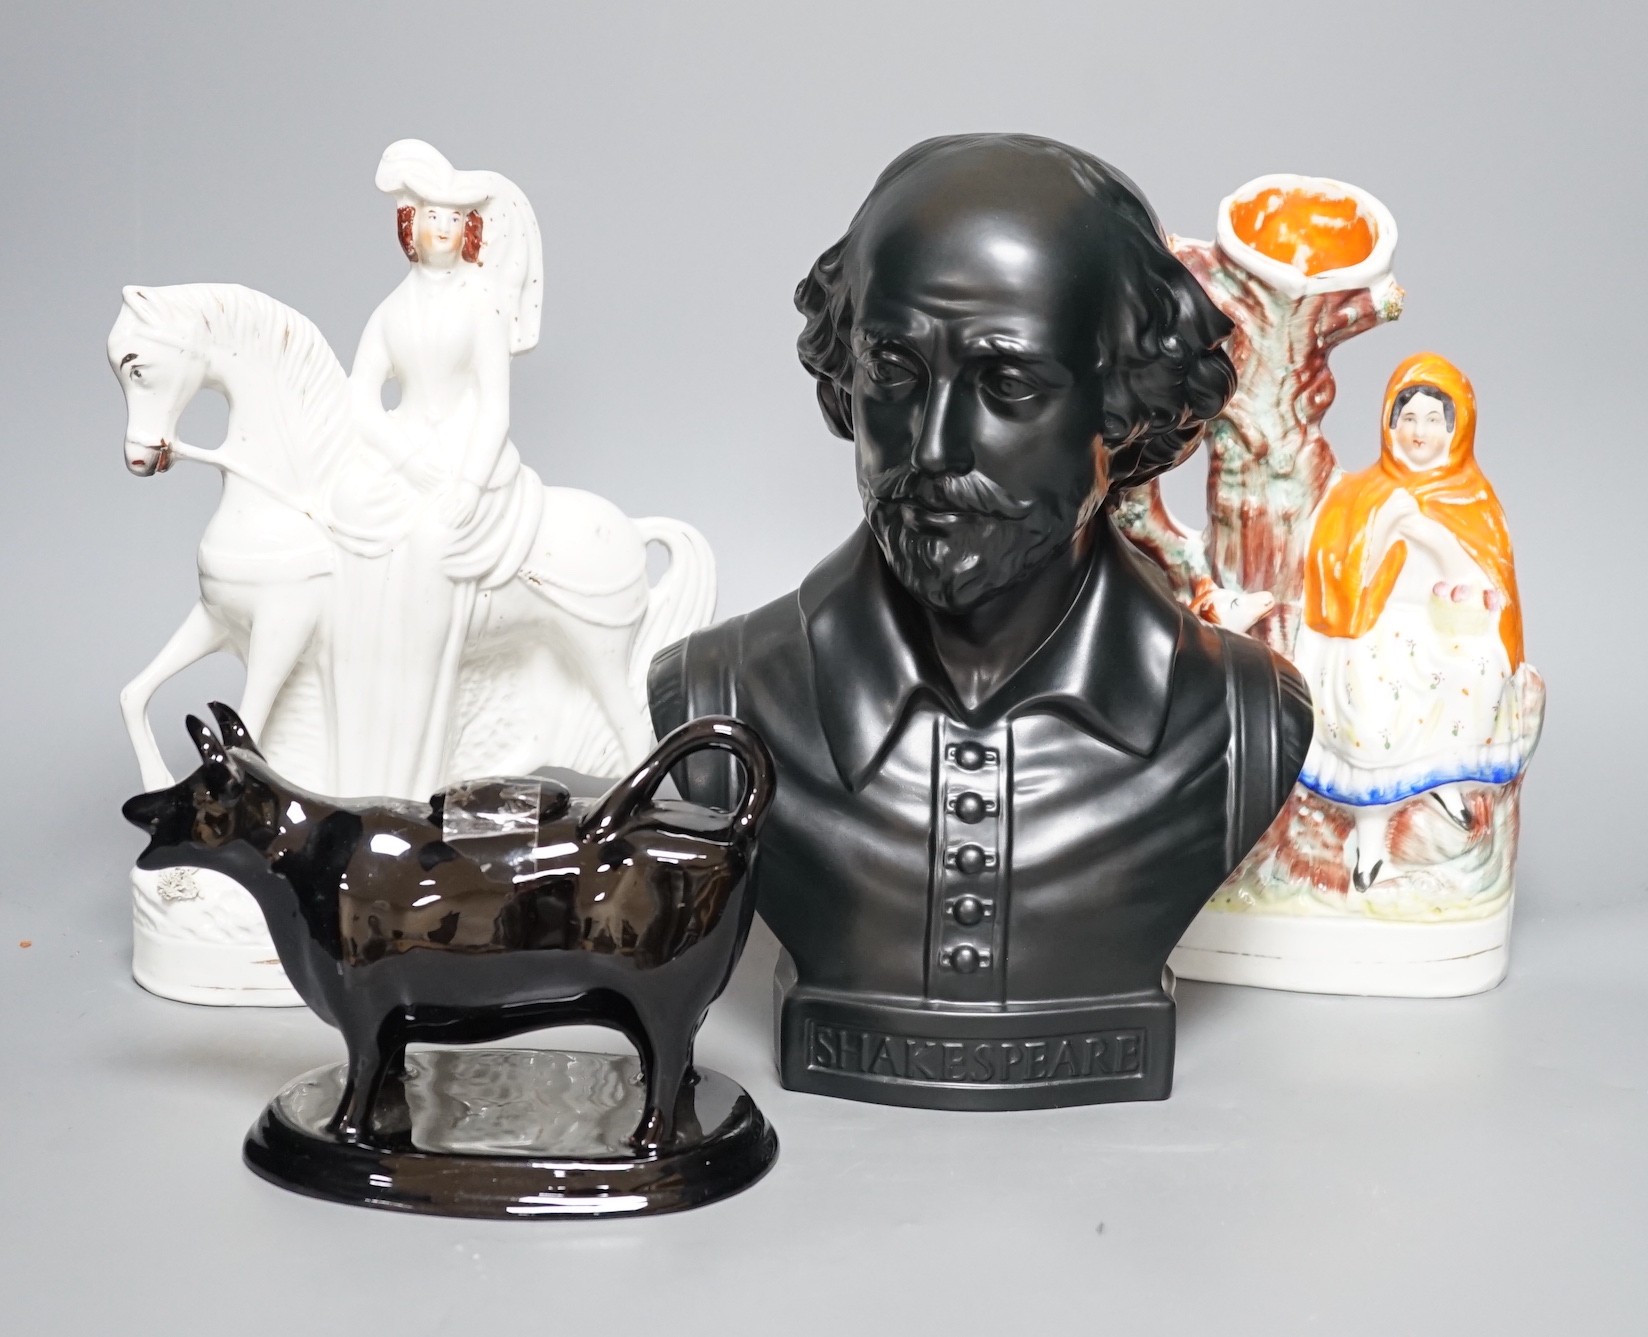 A Wedgwood glazed black basalt bust of Shakespeare, two Victorian Staffordshire figures and a cow